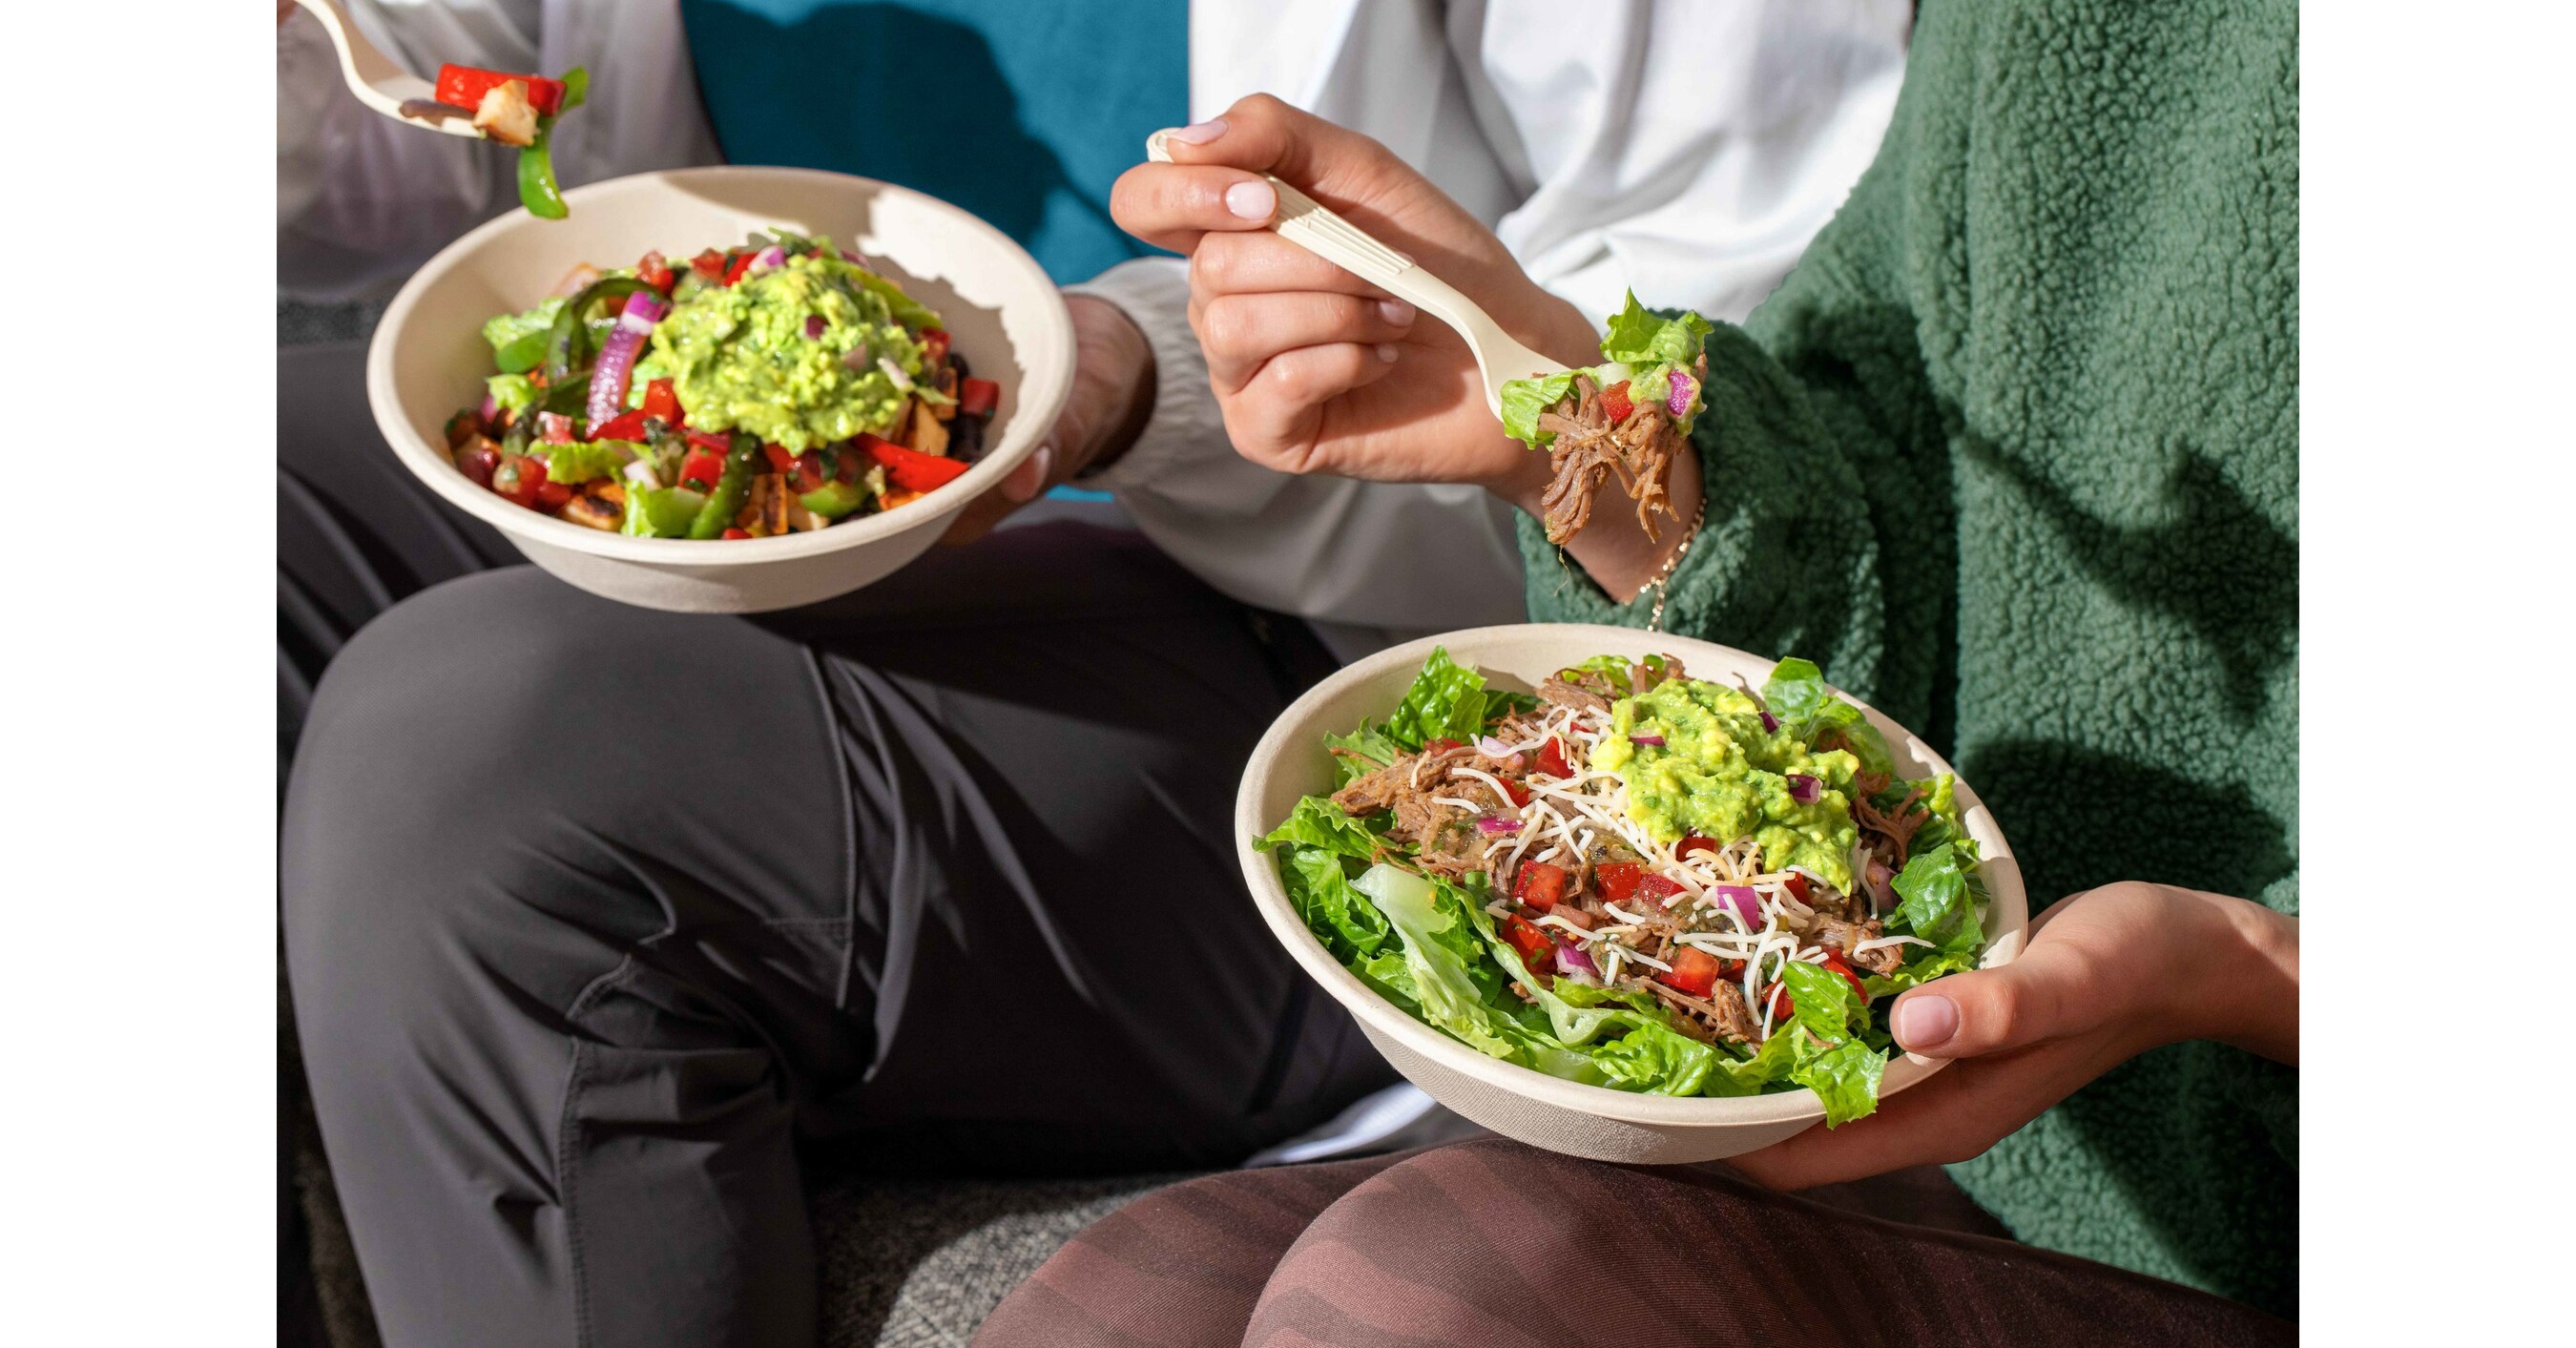 Chipotle Launches 2 New Vegan Bowls to Support New Year's